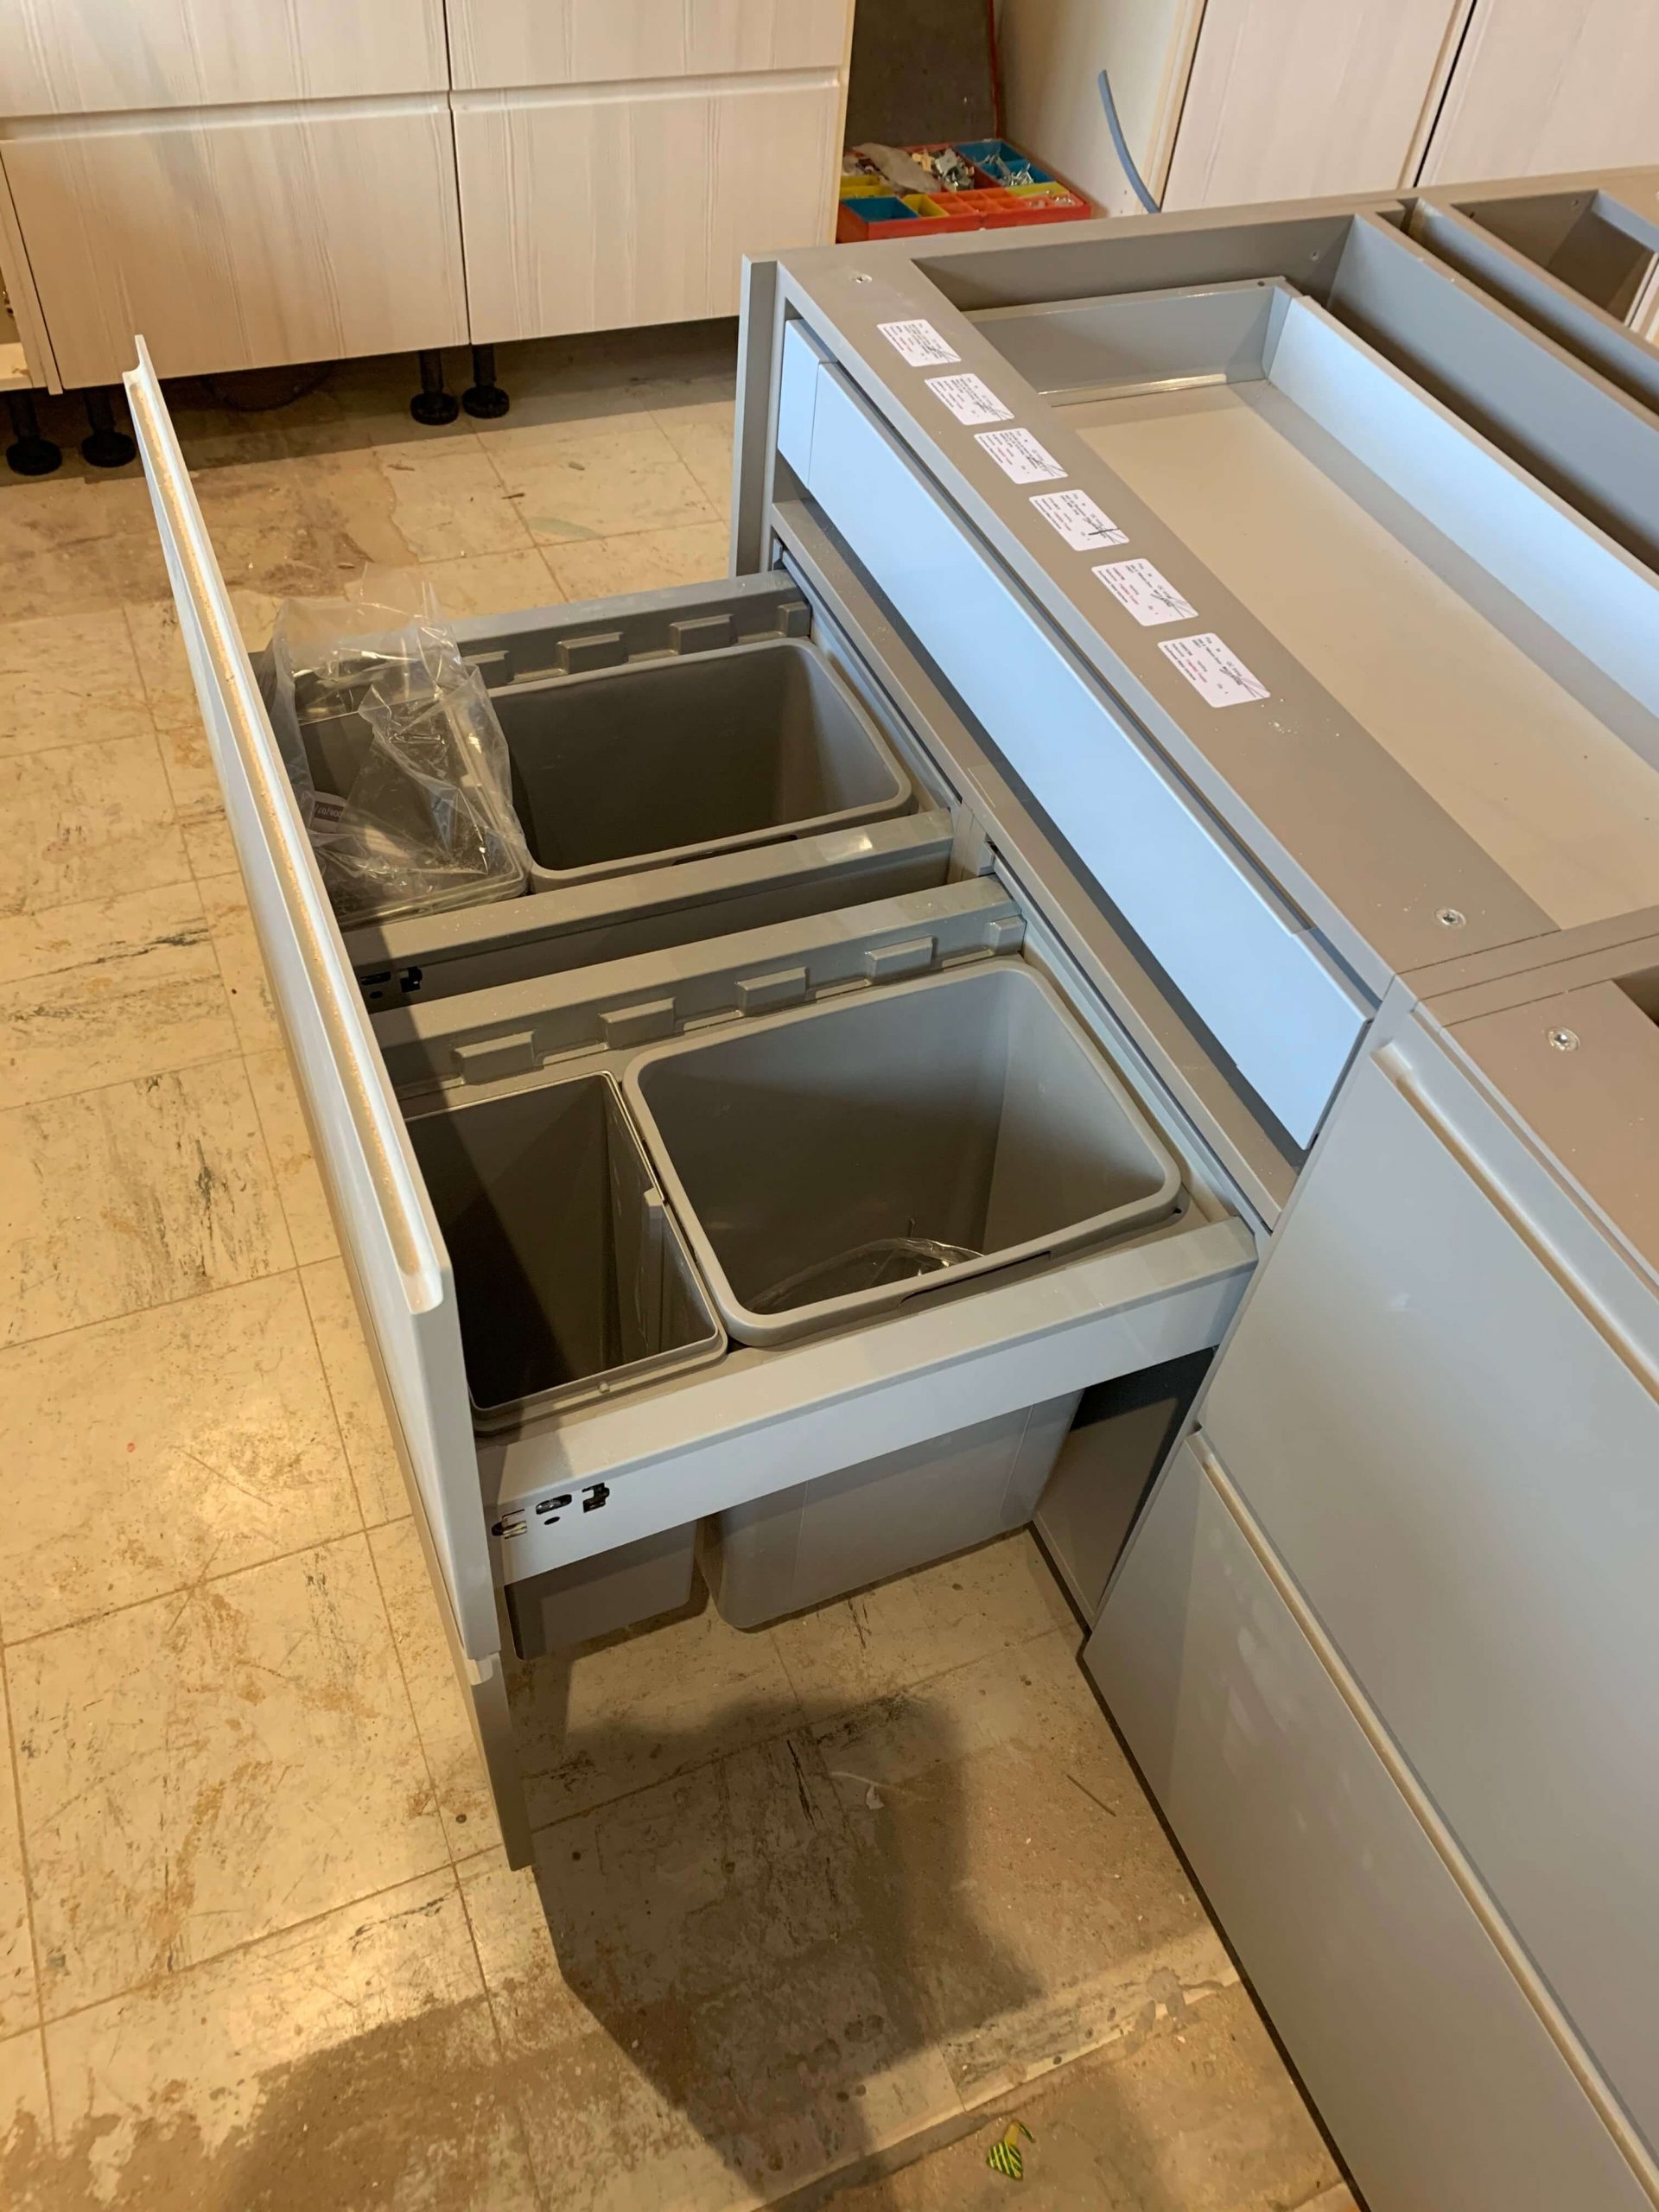 Twin Waste/Recycle Drawers Fitted